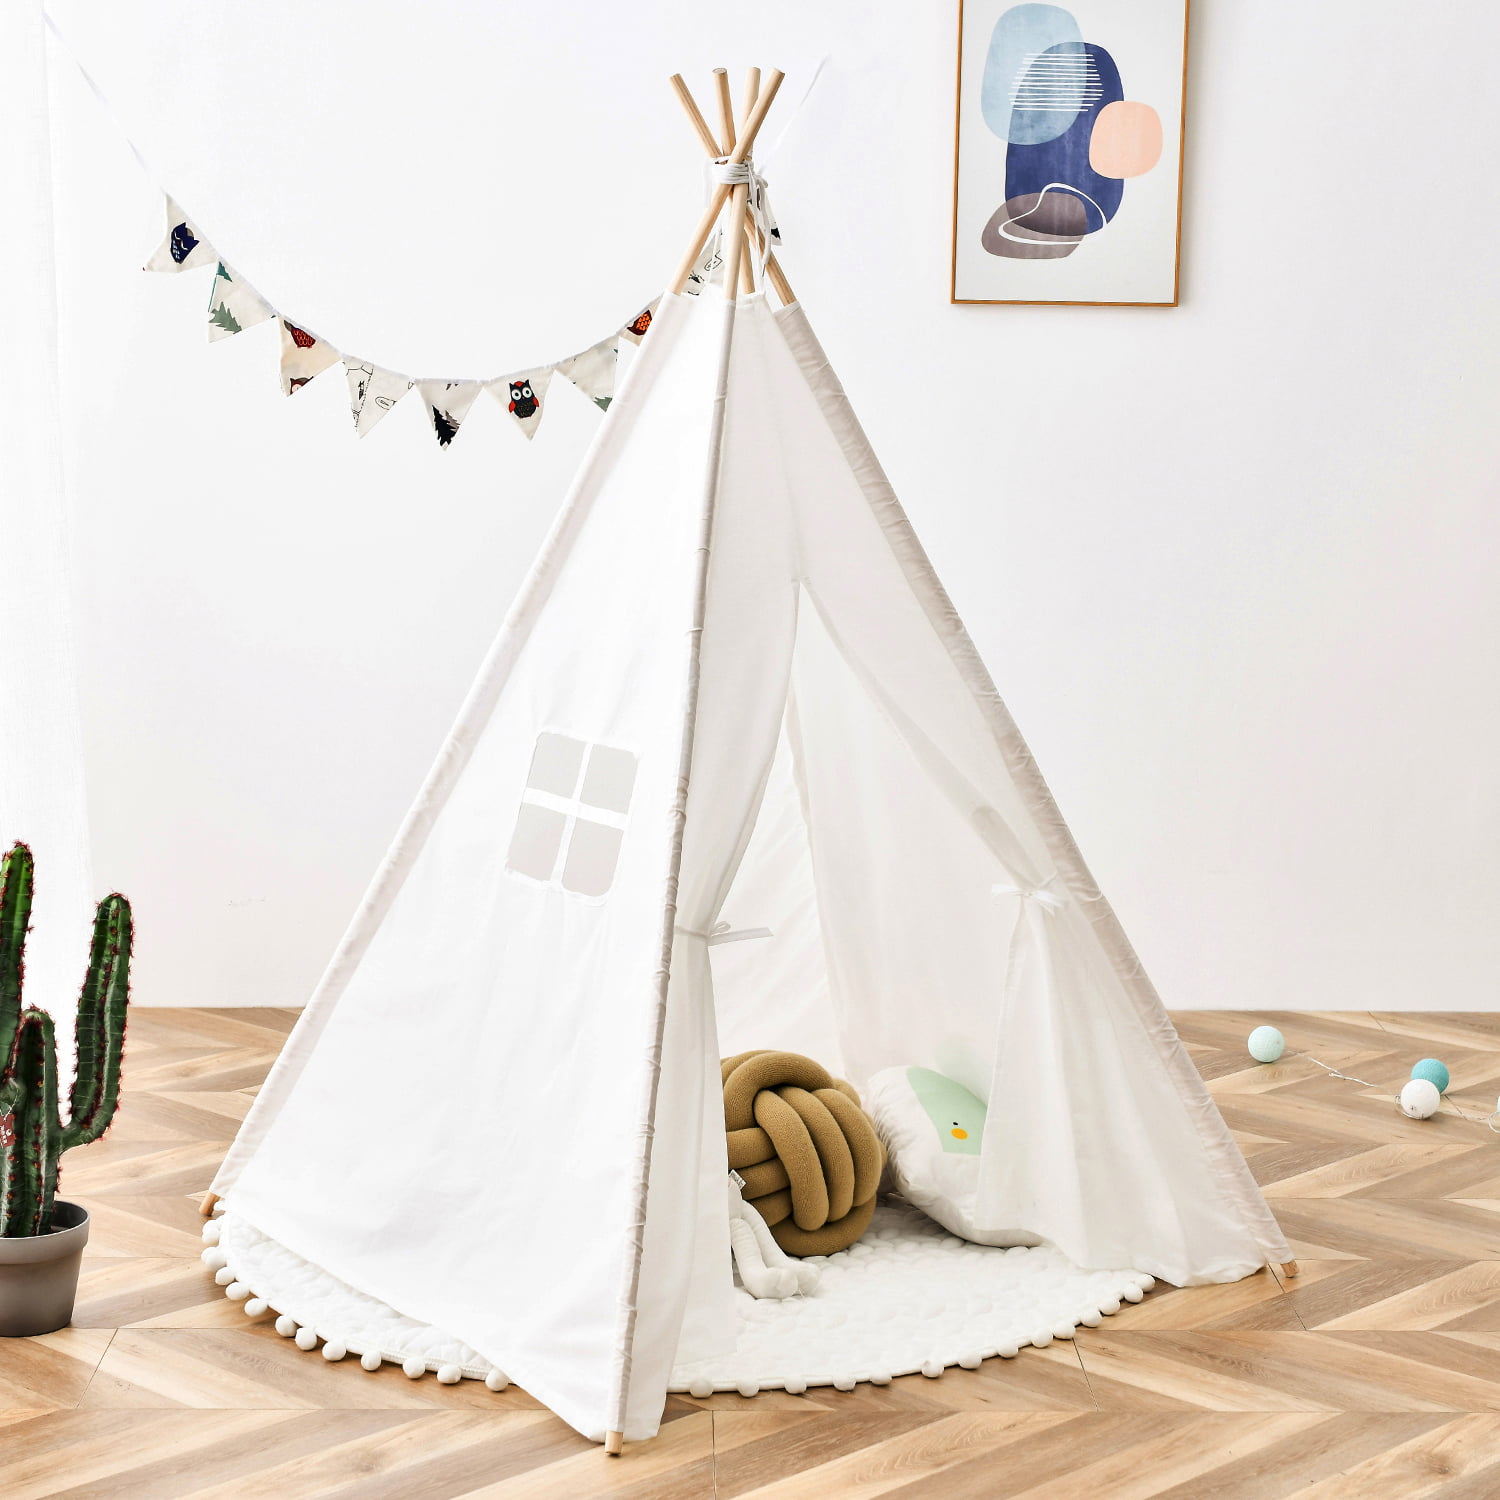 JEKANEL 6' Giant Canvas Kids Indian Play Teepee Indoor Tent Blue Stripes 